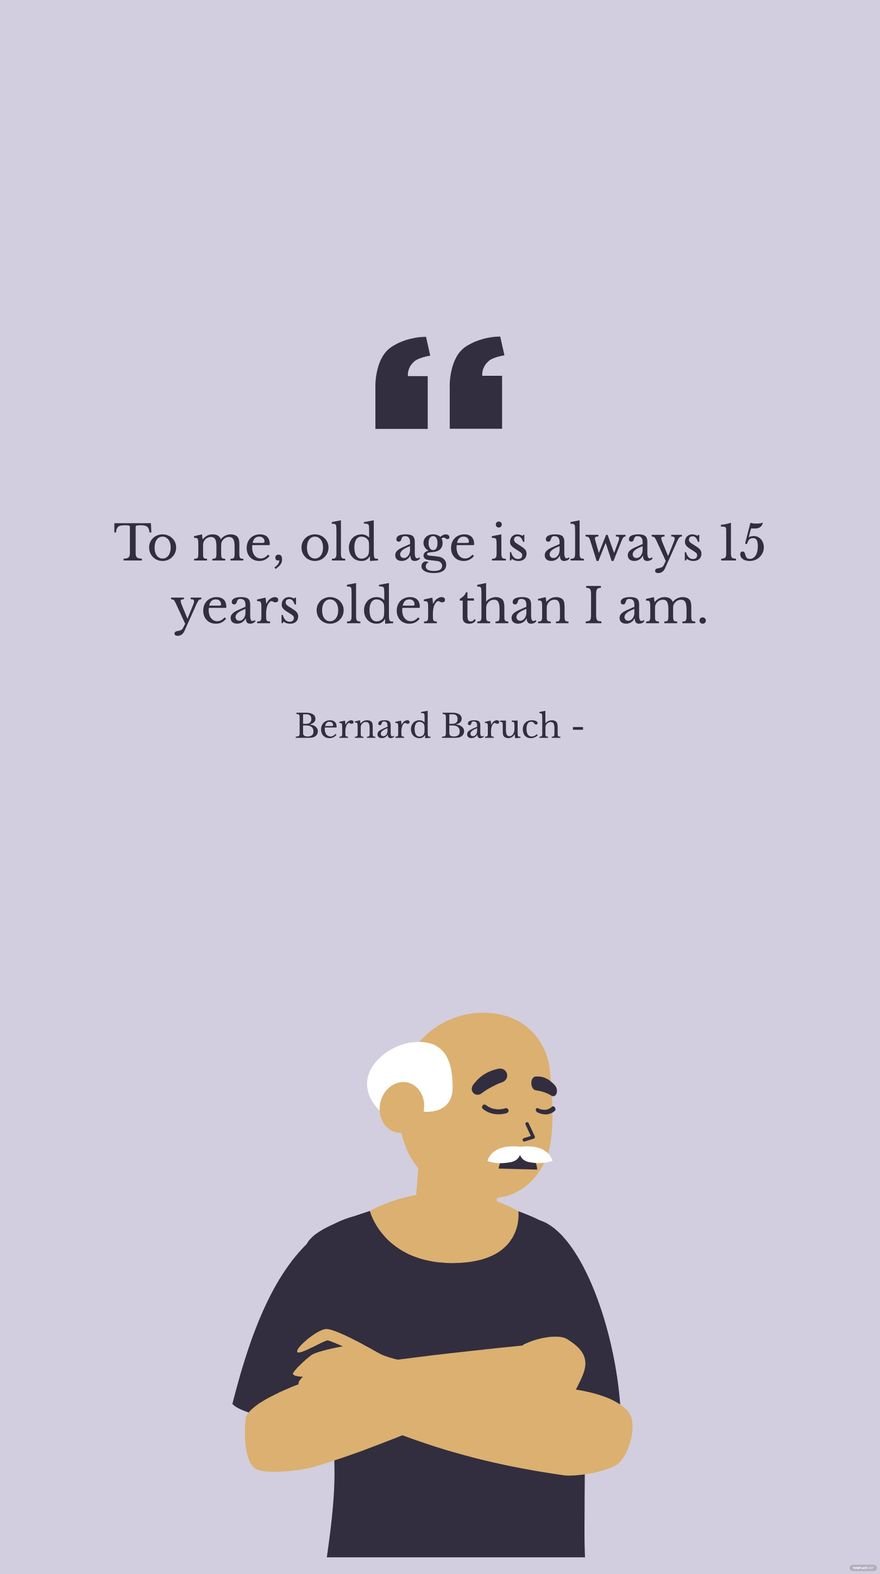 Free Bernard Baruch - To me, old age is always 15 years older than I am. in JPG